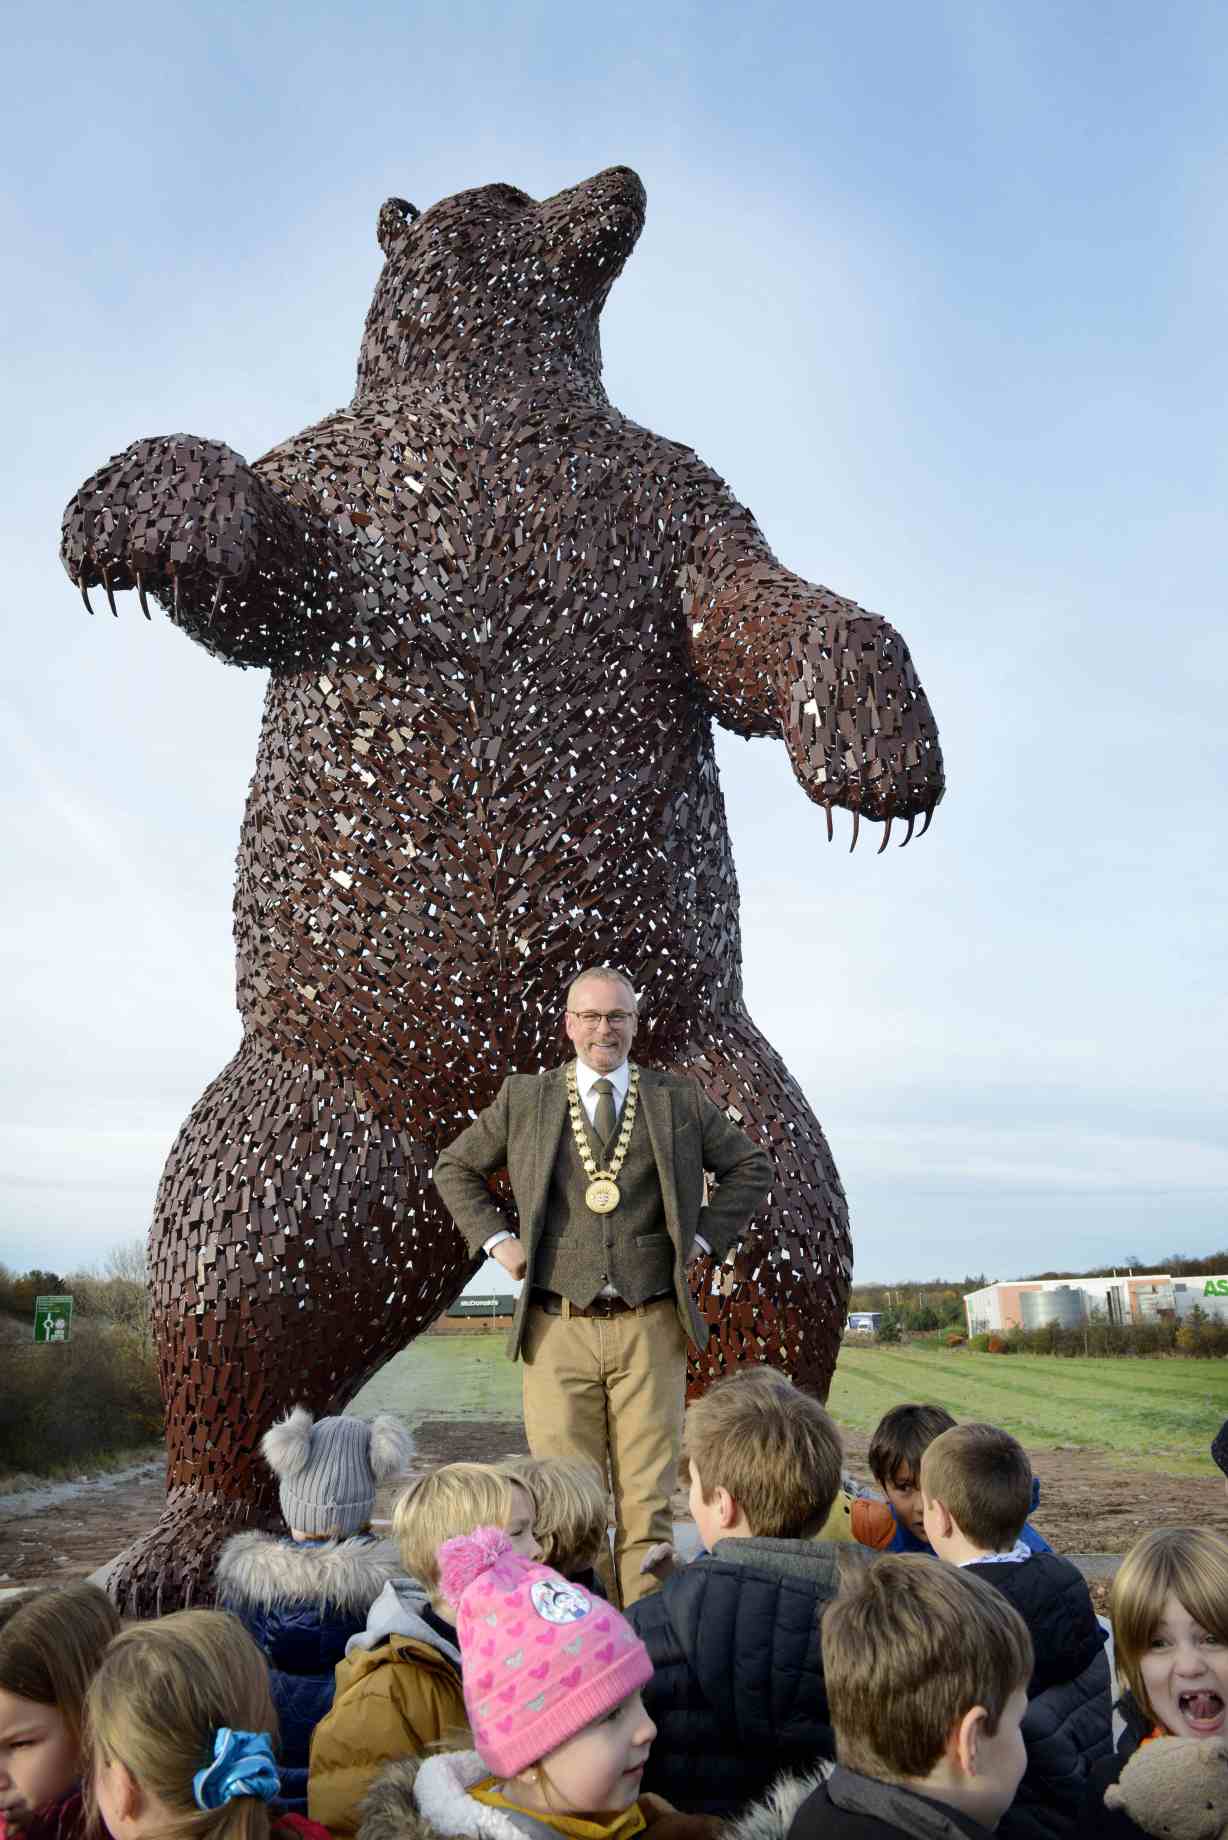 And finally... Large bear sculpture unveiled in East Lothian